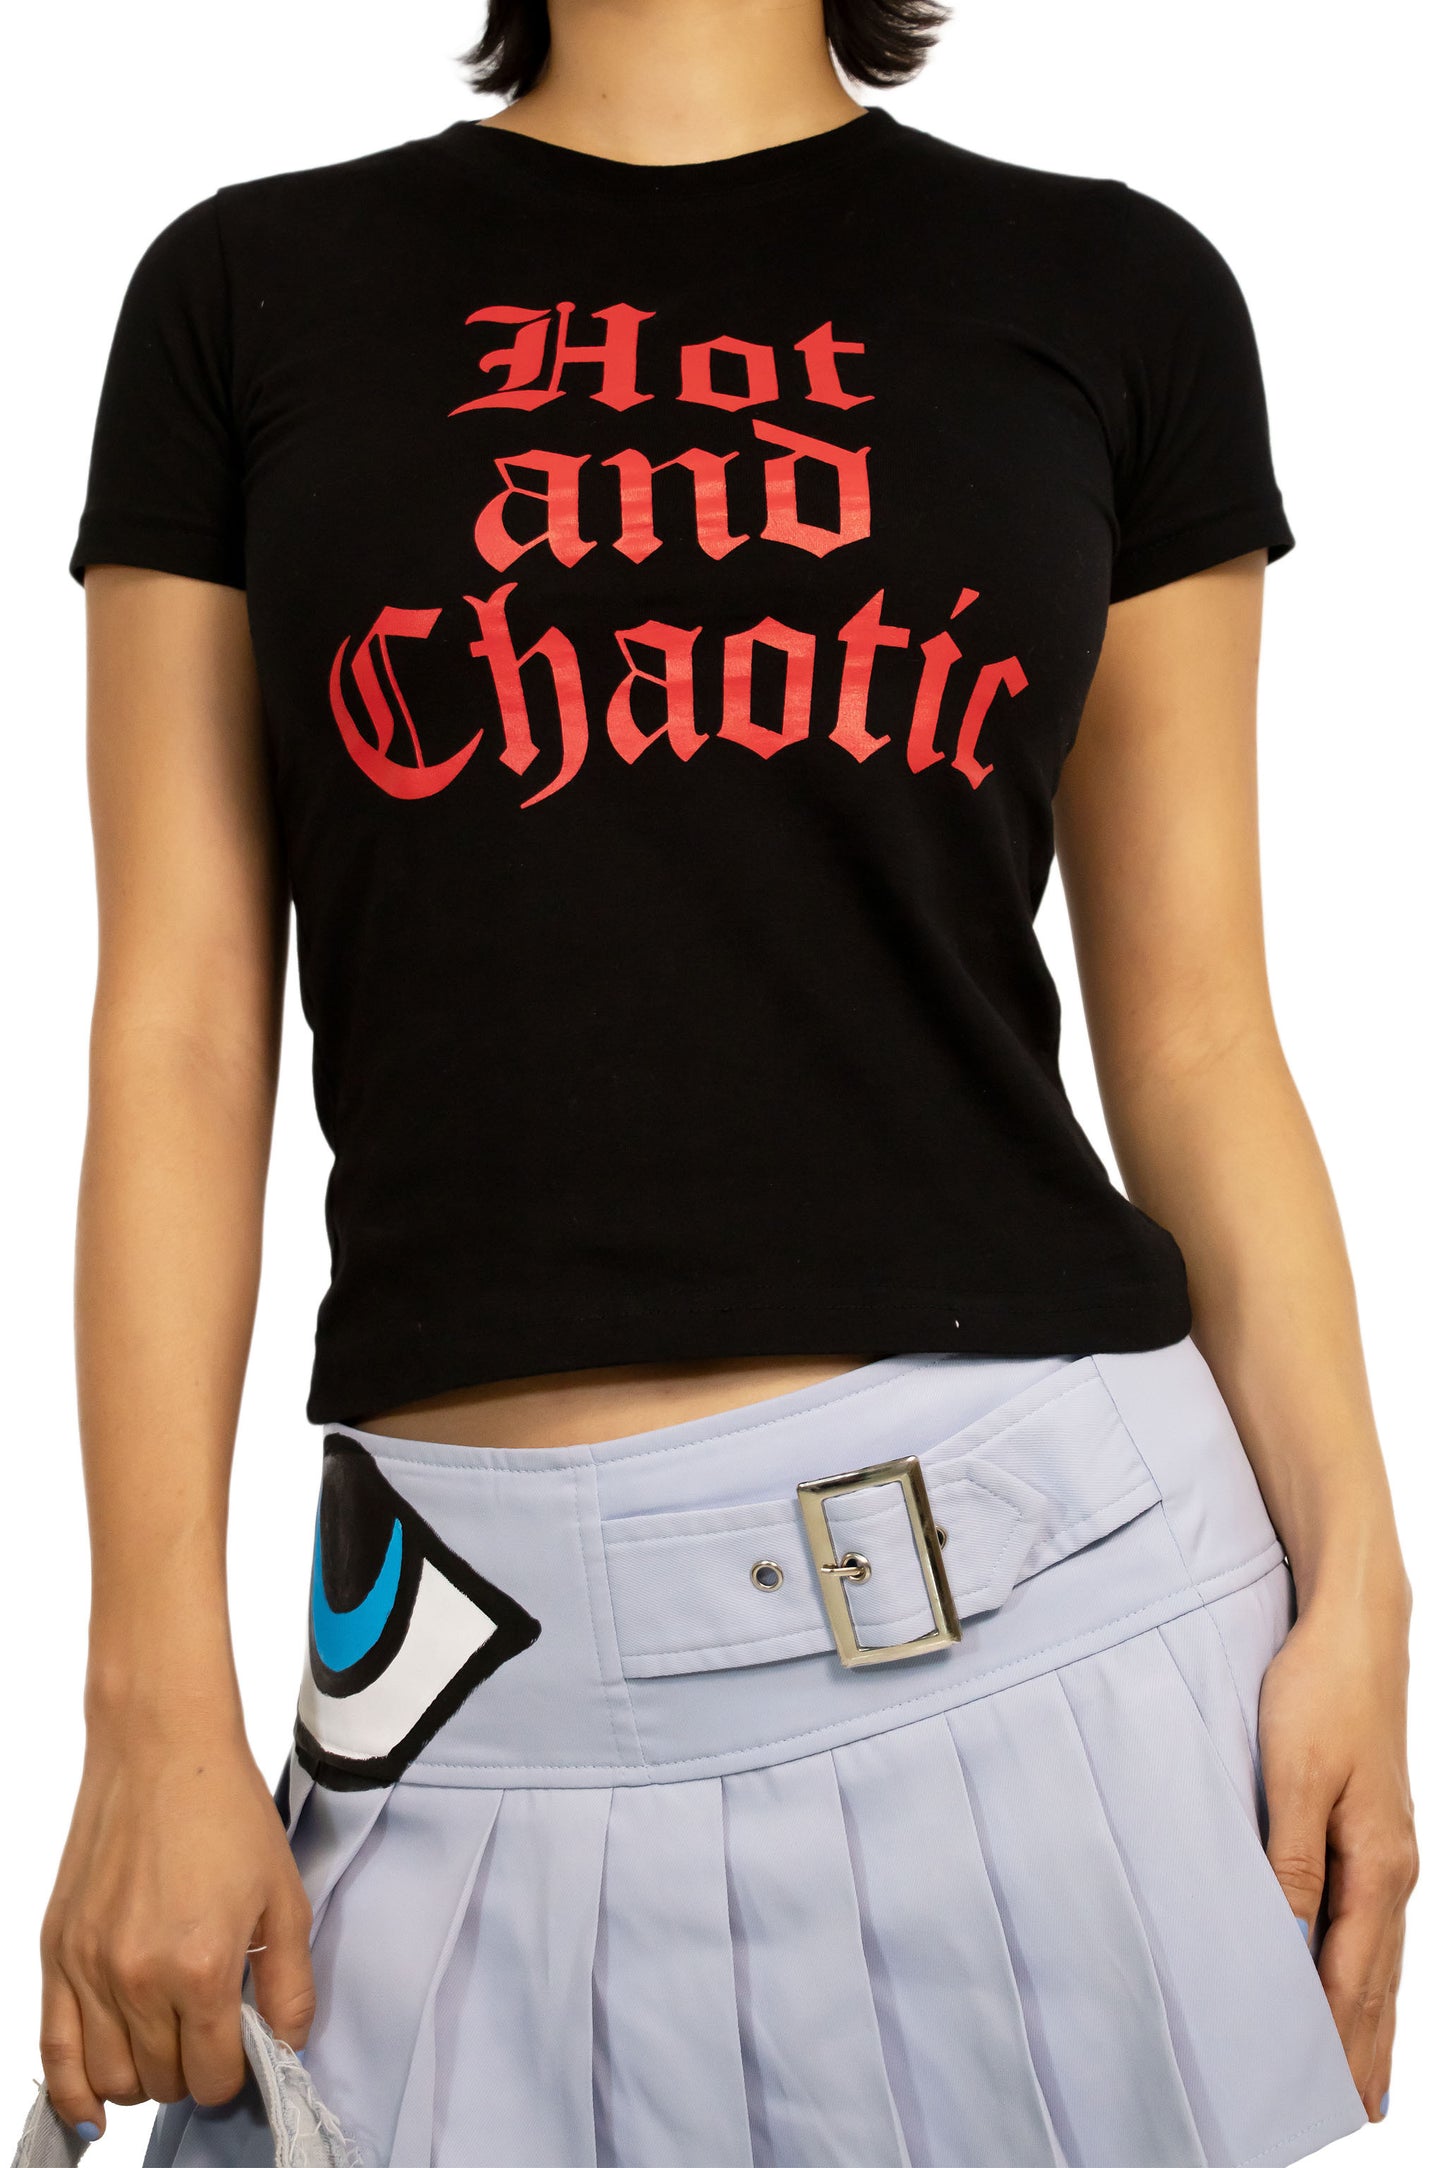 Hot and Chaotic Tee